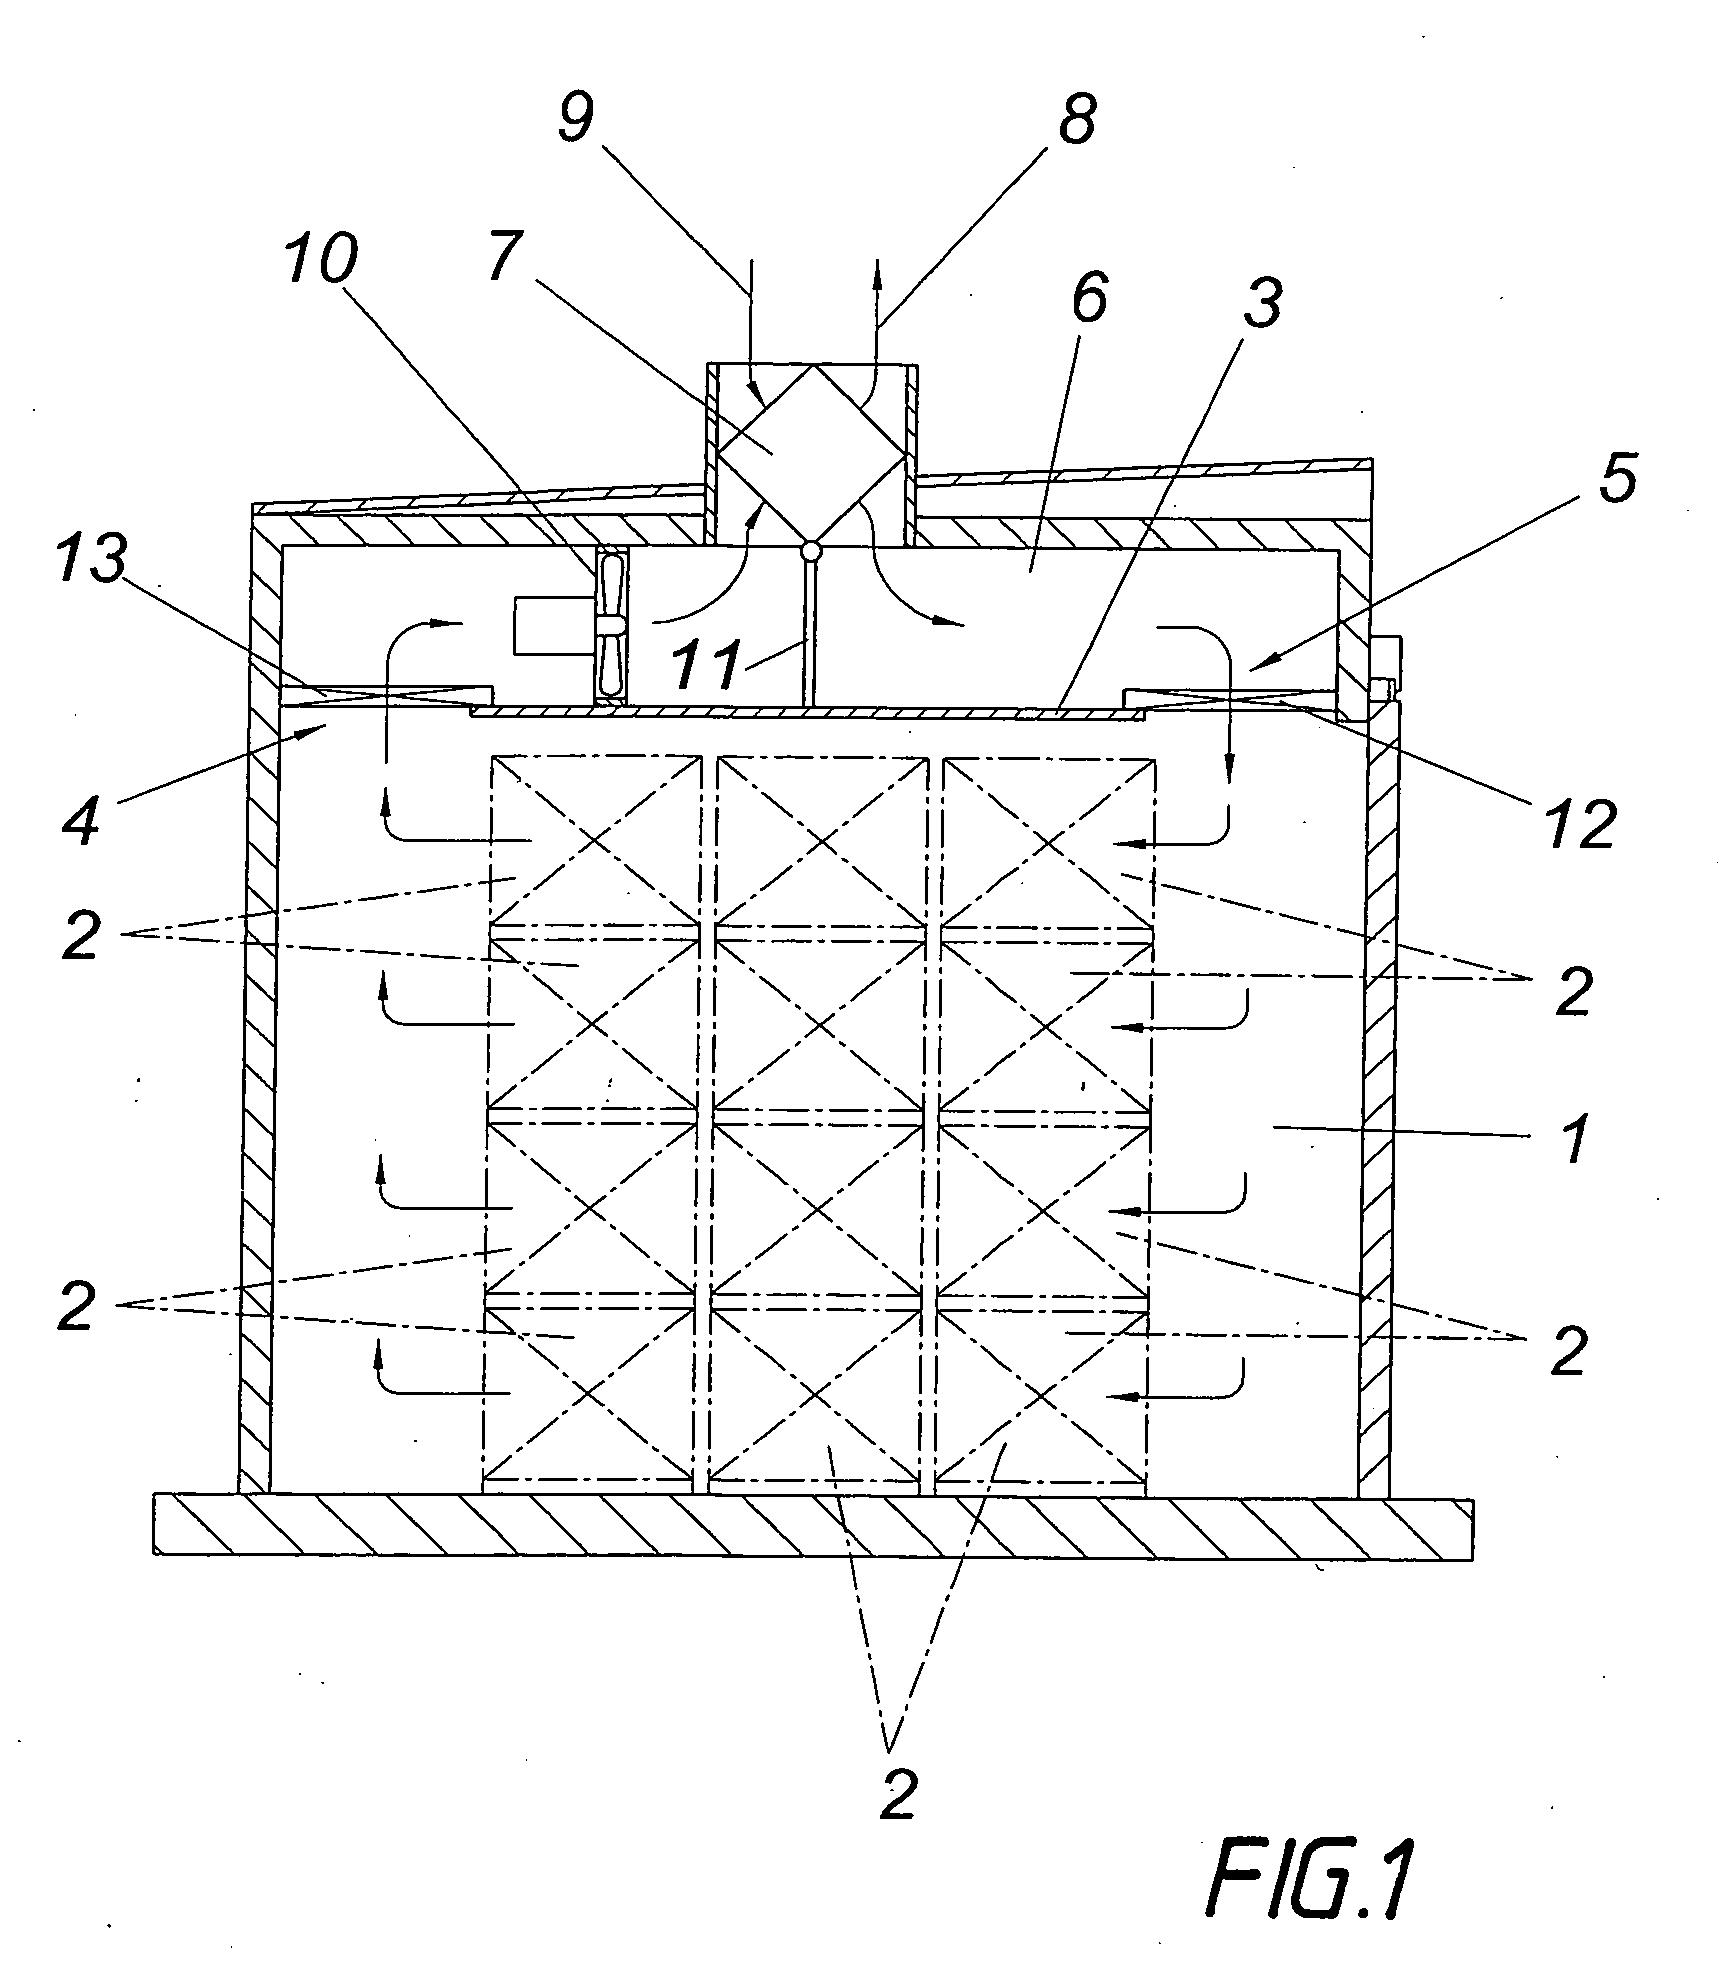 Method for Drying Wood Combined Into Stacks